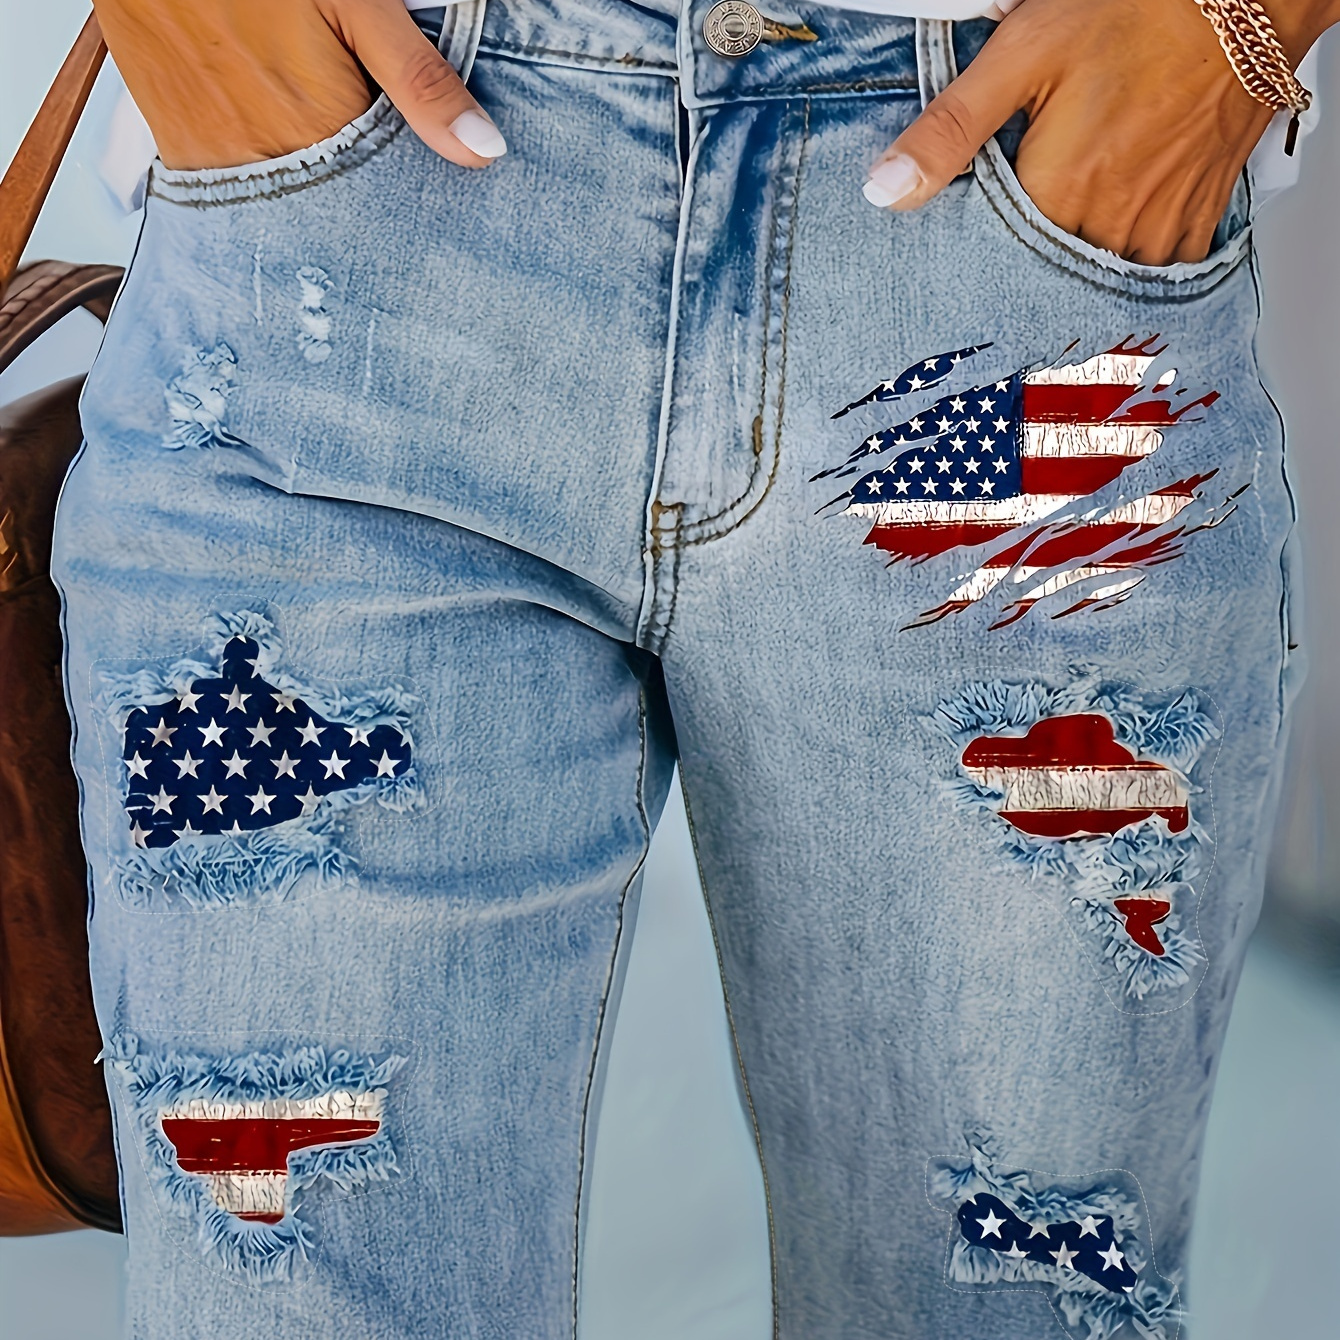 

Women's Distressed Denim Bermuda Shorts, High-waisted With Frayed Hem, Stretchable Casual Plus-size Fashion, Ripped Patchwork With American Flag Design, Independence Day Outfit 4th Of July